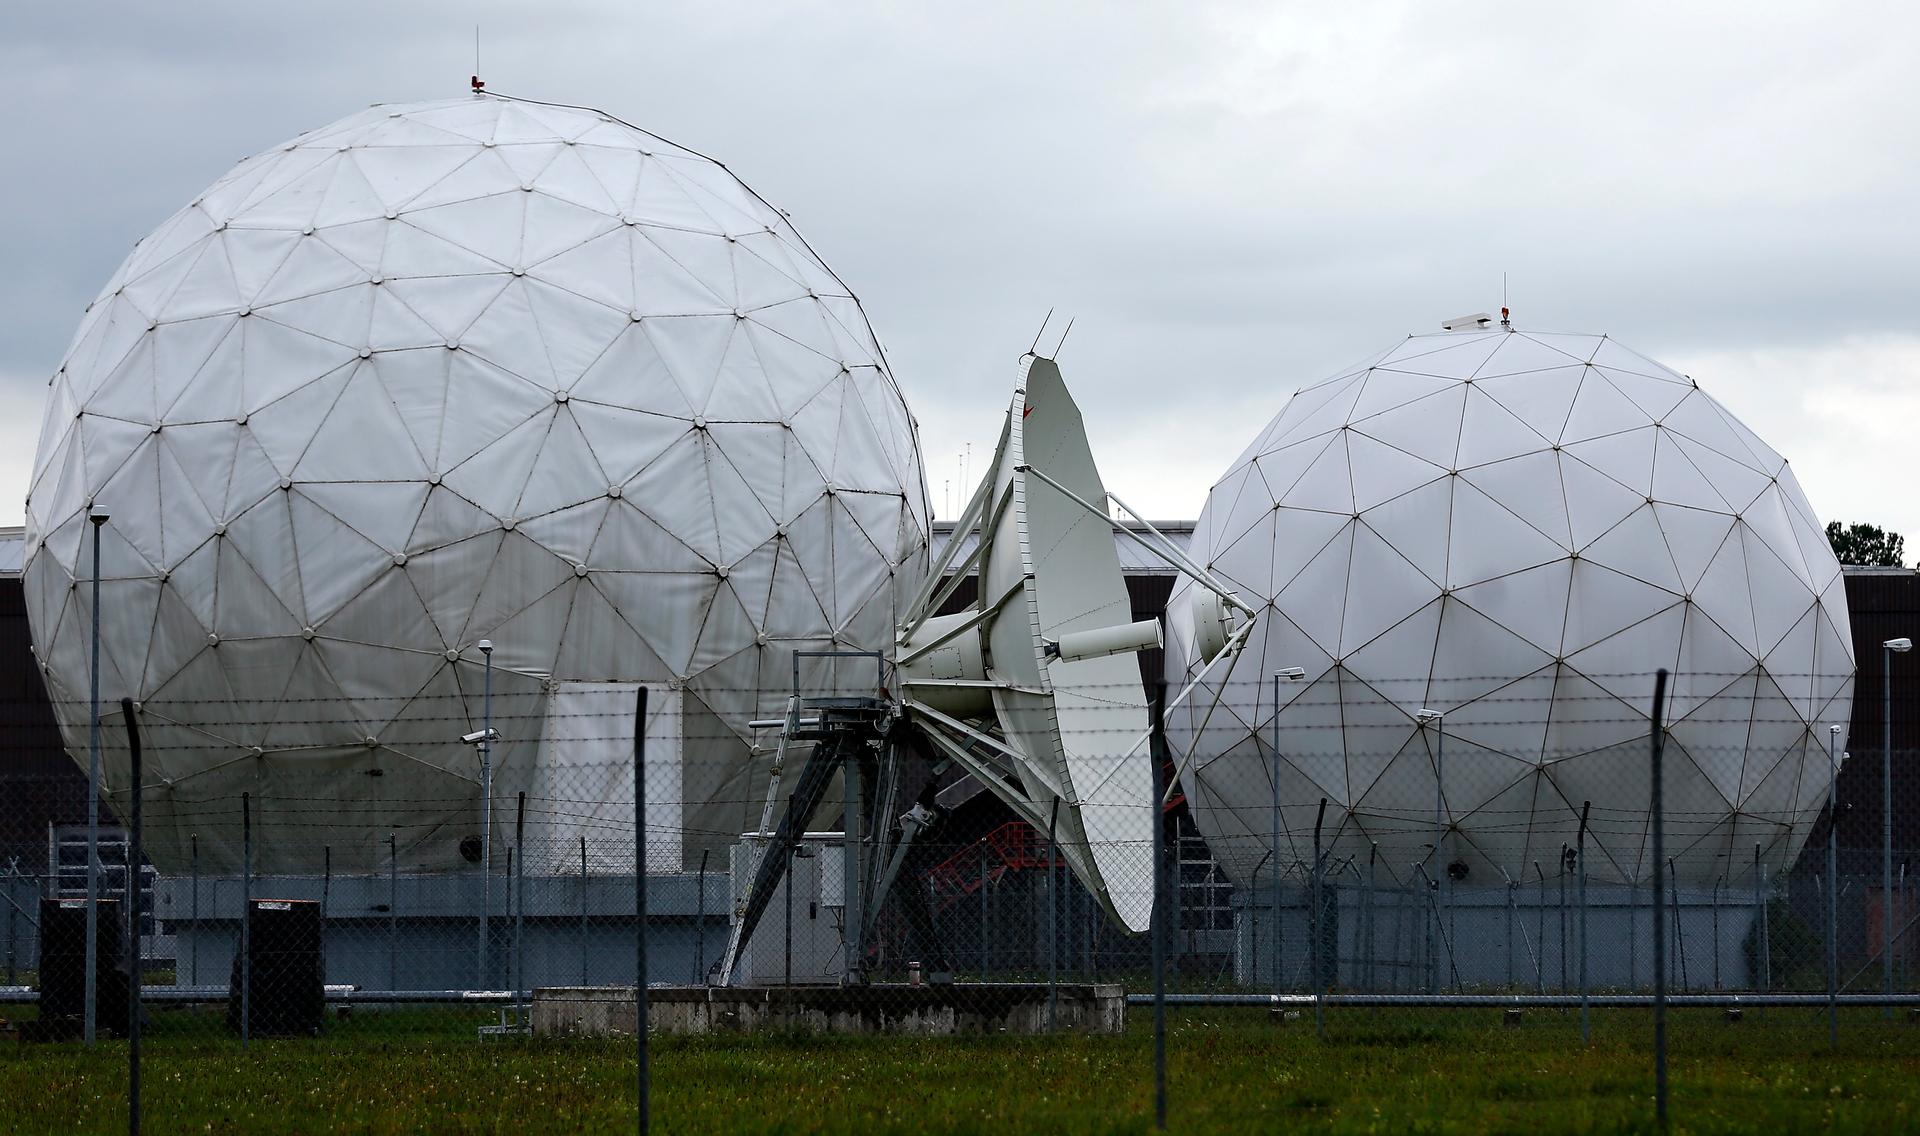 Former NSA monitoring base in Germany